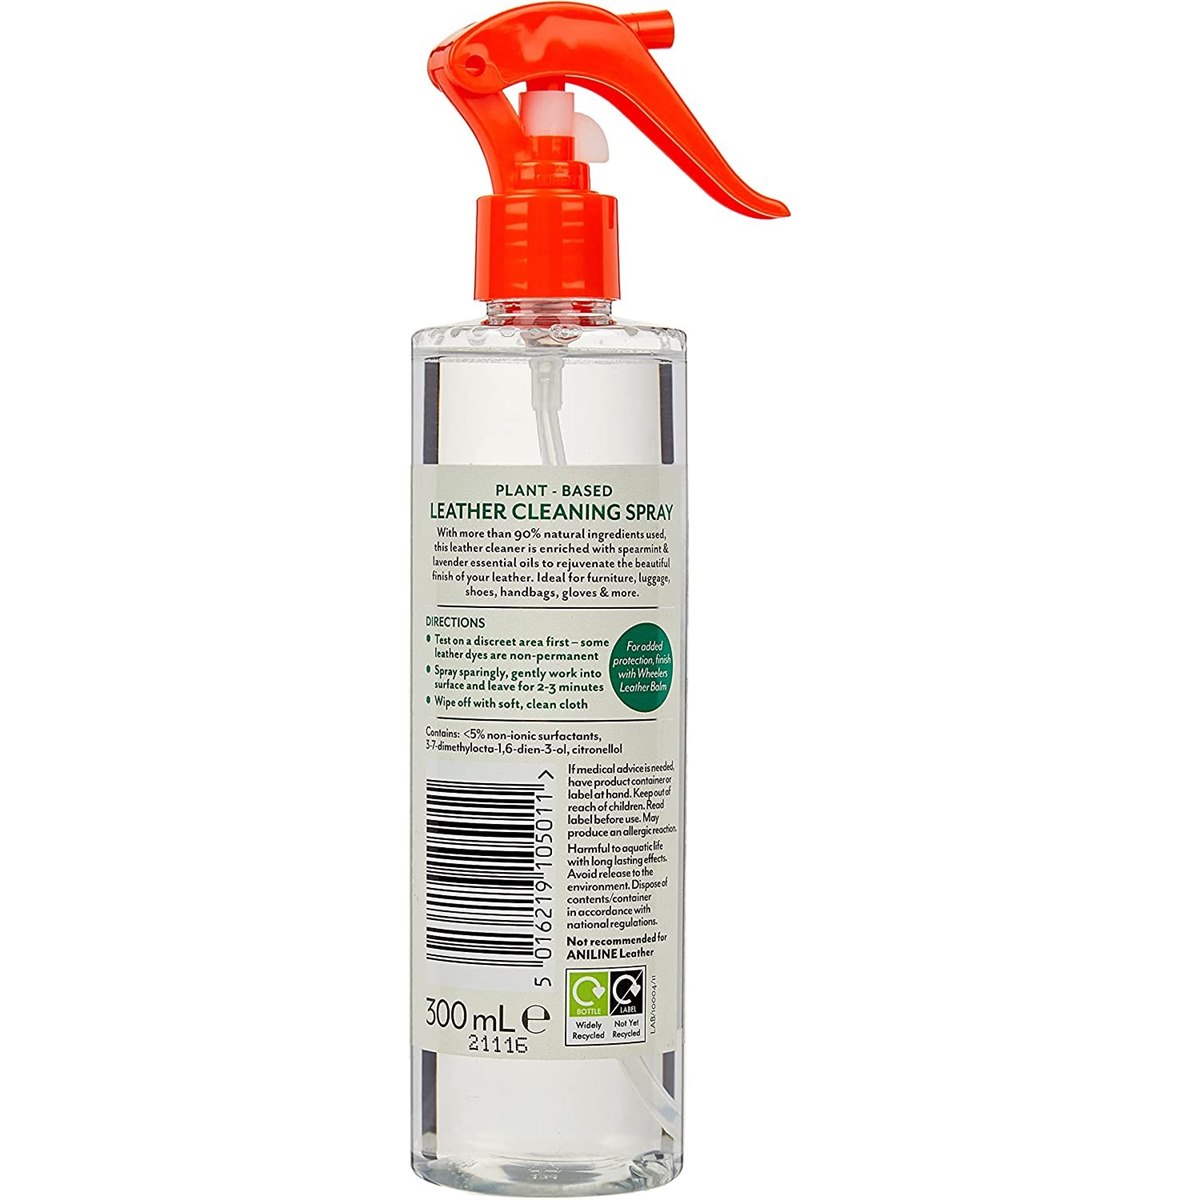 Wheelers Leather Cleaning Spray Usage Instructions